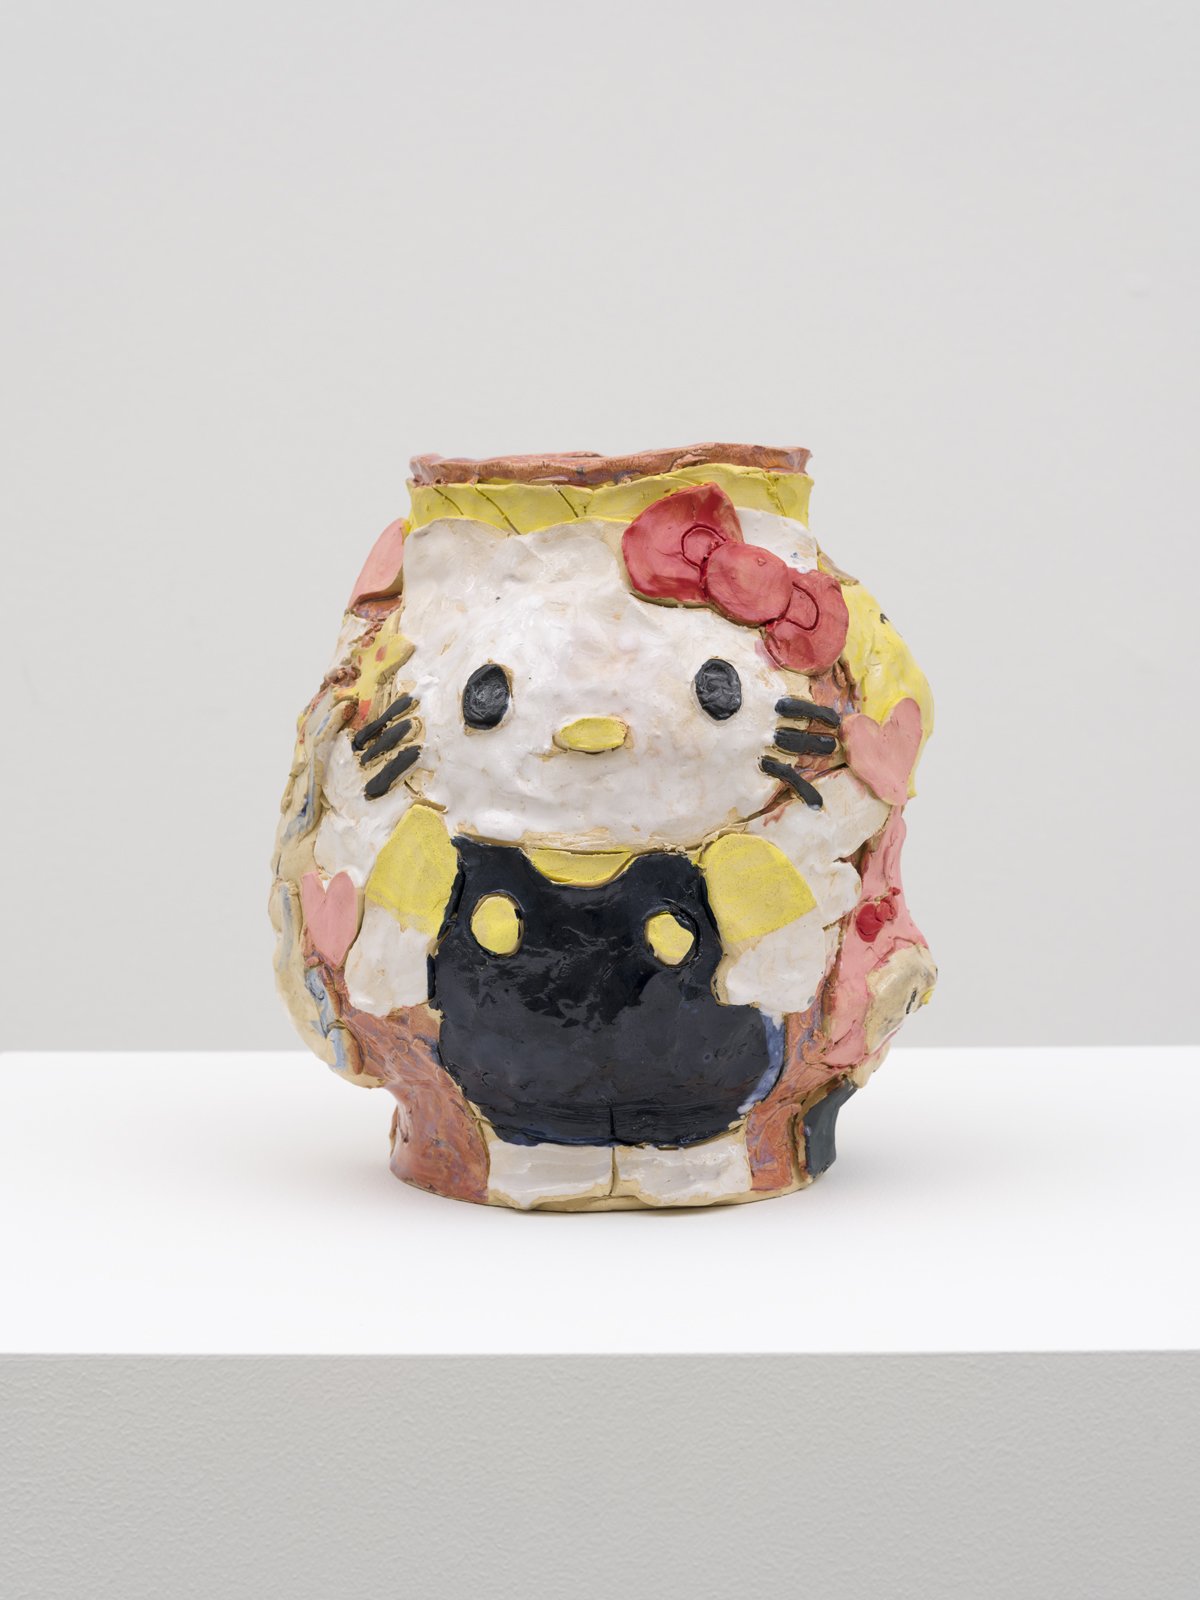  Emily Yong Beck  Sailor Moon and Hello Kitty, 2023  Stoneware, majolica, glaze, gold luster  10 x 8¾ x 8½ in. 